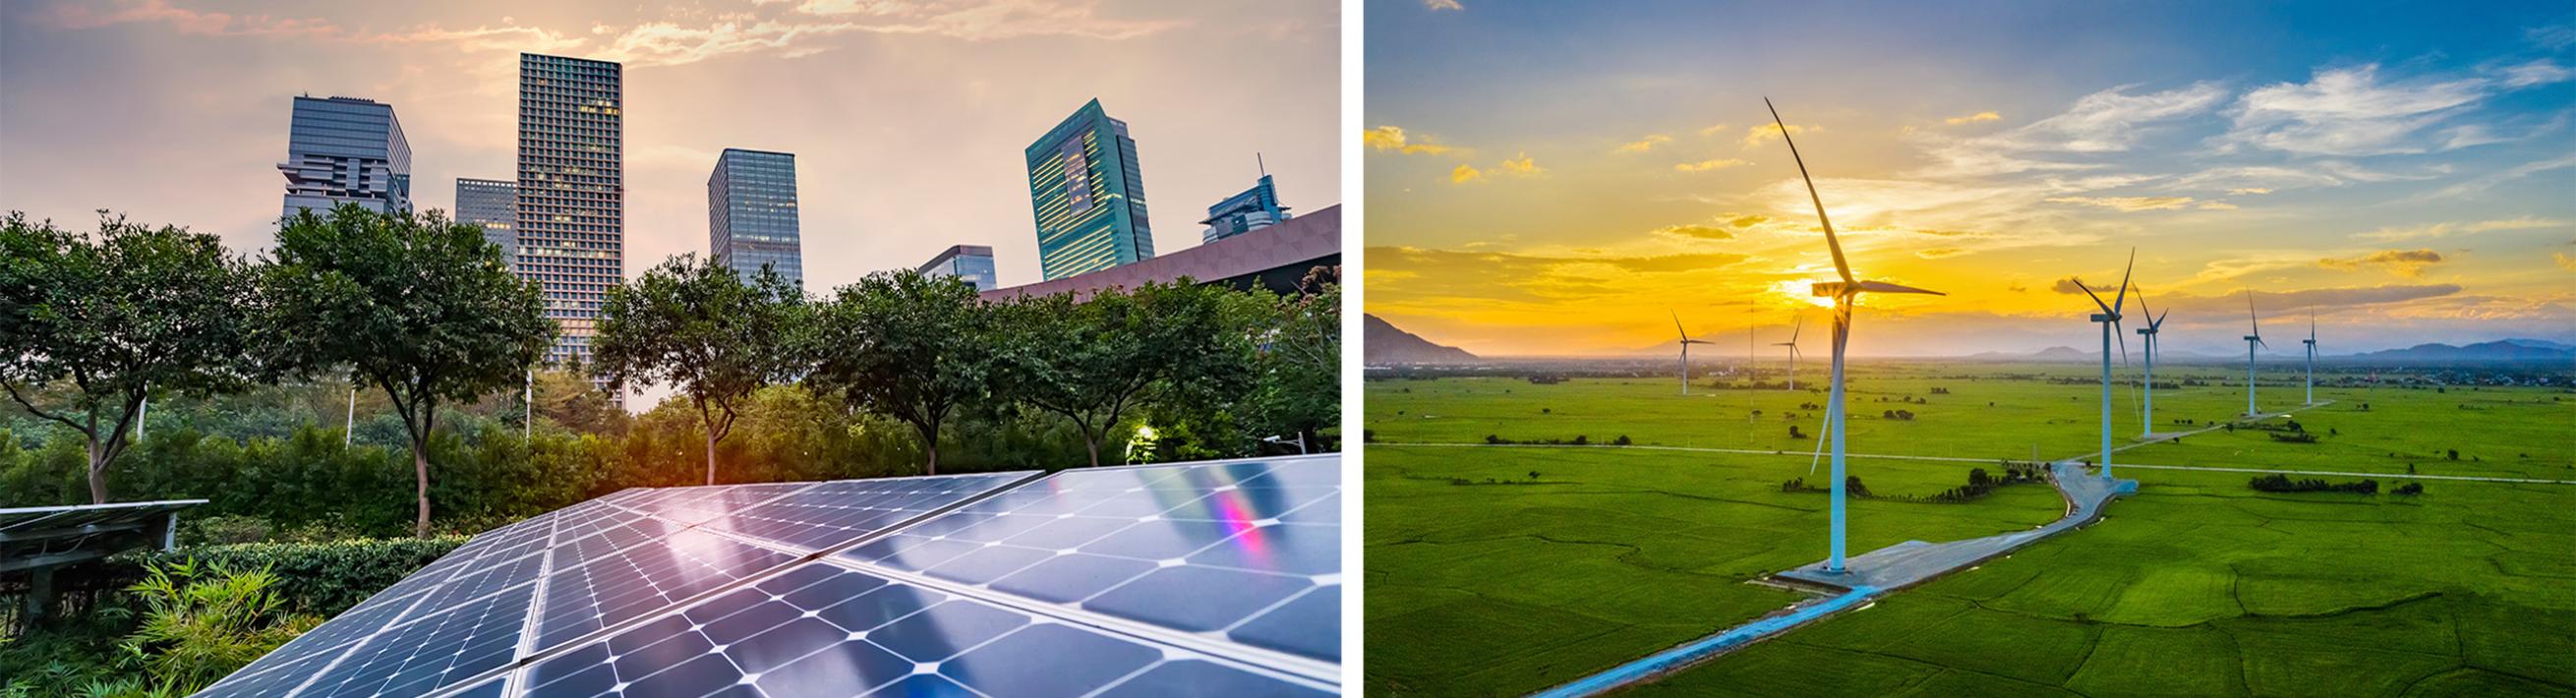 A diptych: the first image features a close-up shot of solar panels on a rooftop set against a backdrop of trees and a city skyline, the second image features wind turbines in a bright grassy field.